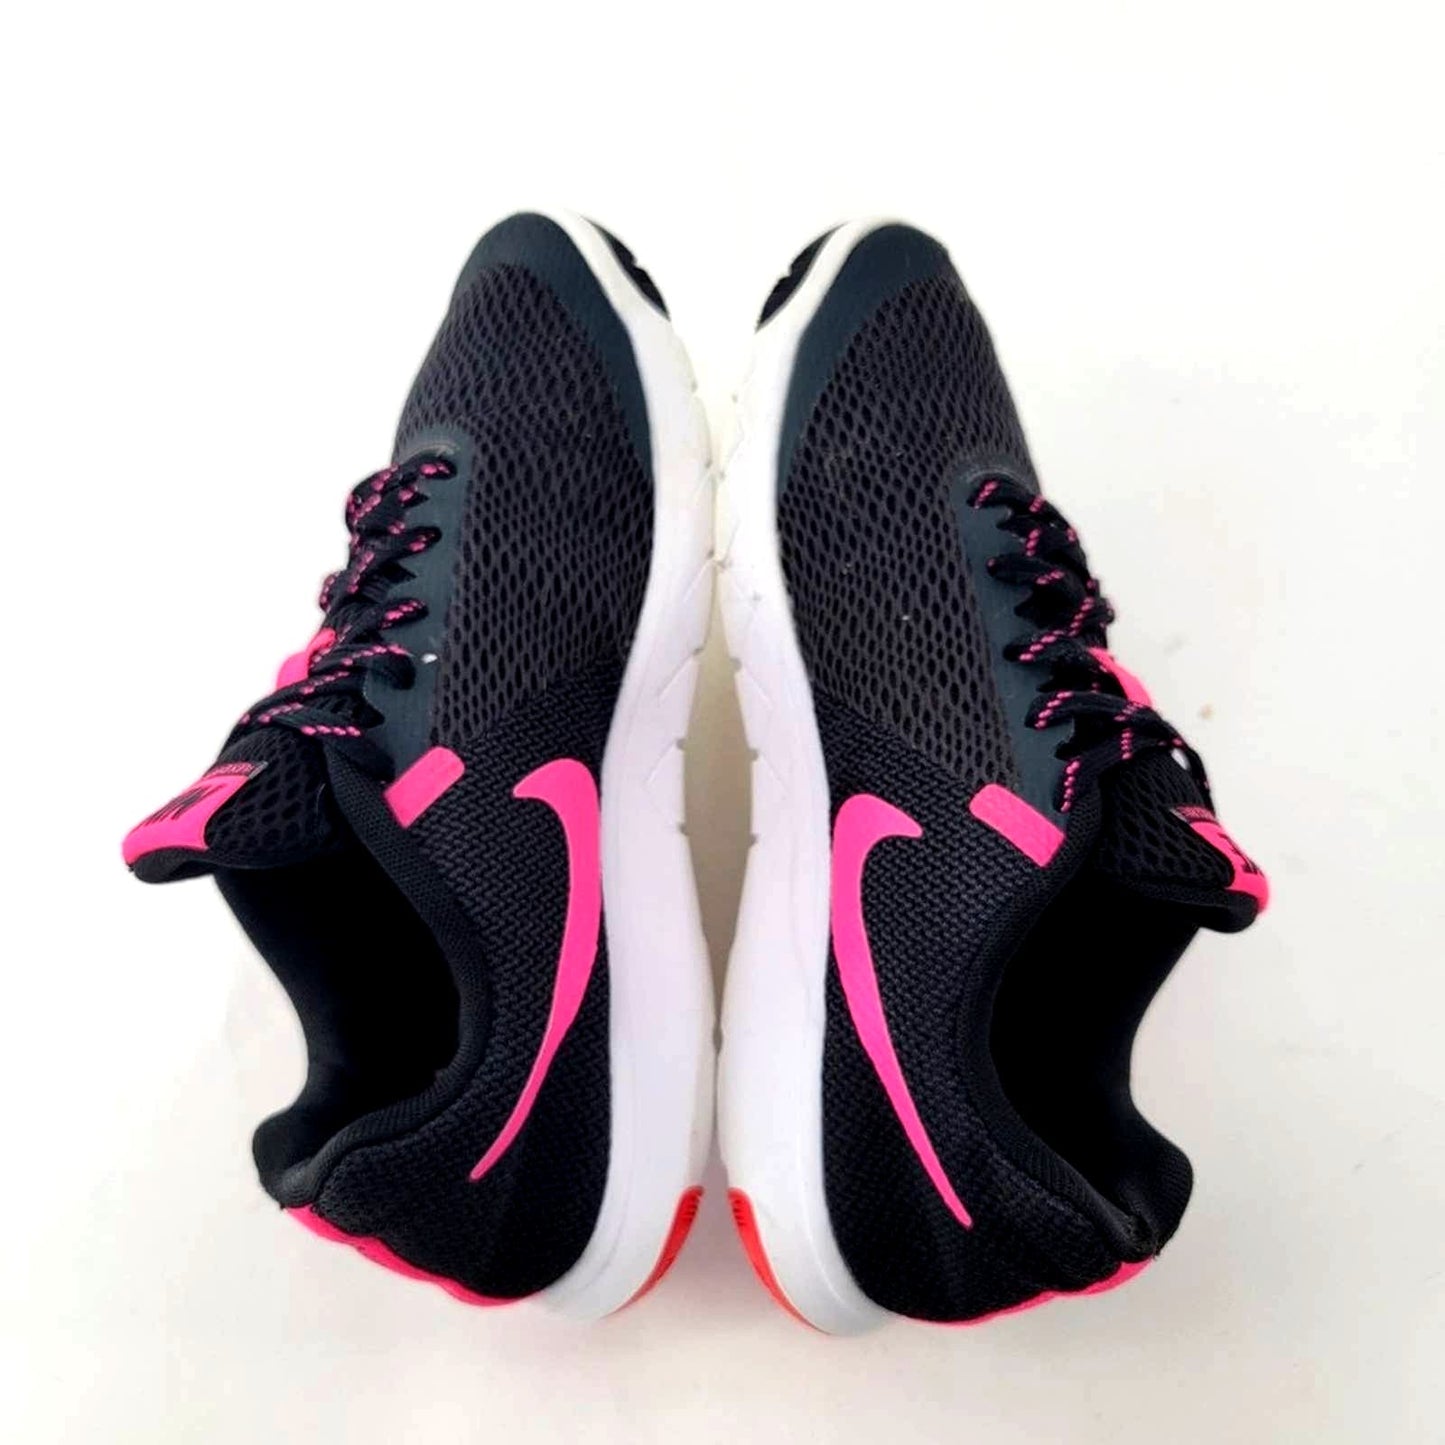 Nike Flex Experience RN 5 Running Shoes - 9.5